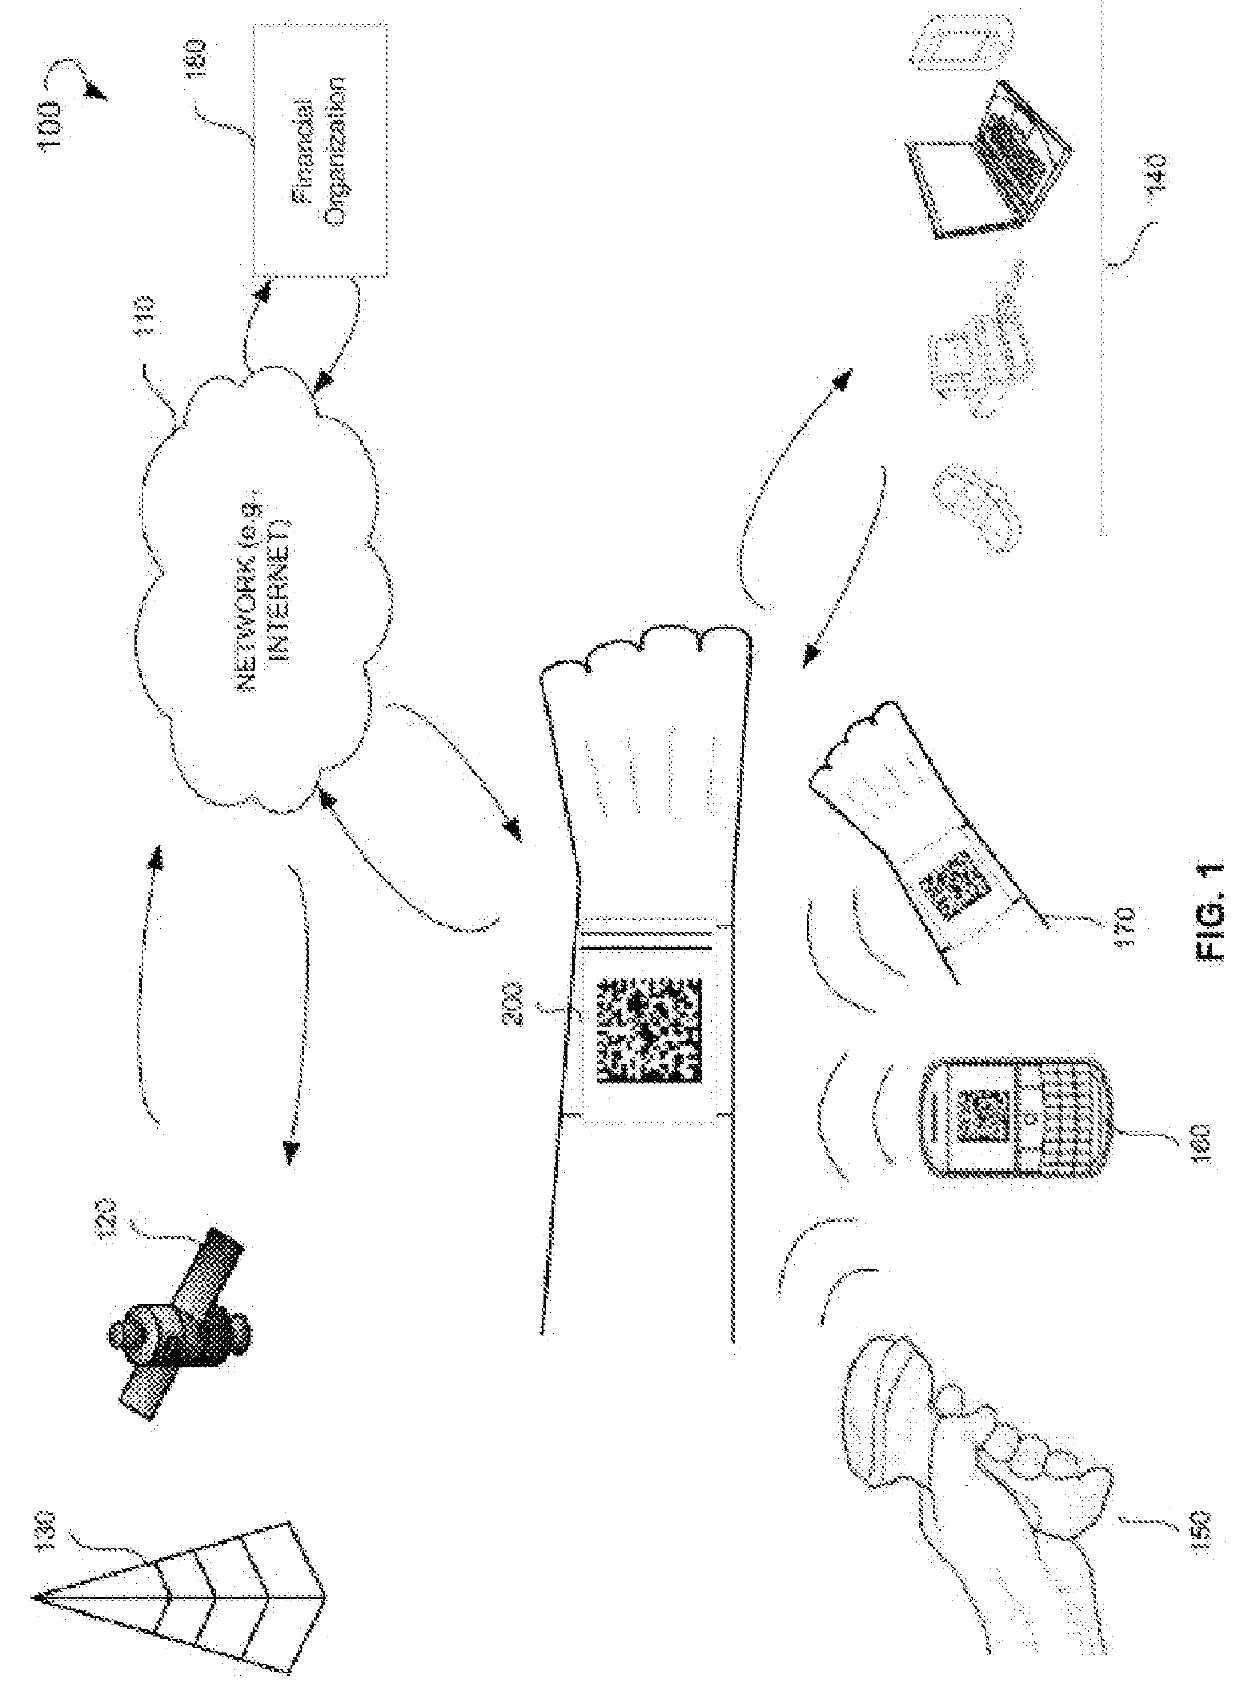 Systems and methods for mobile application, wearable application, transactional messaging, calling, digital multimedia capture and payment transactions